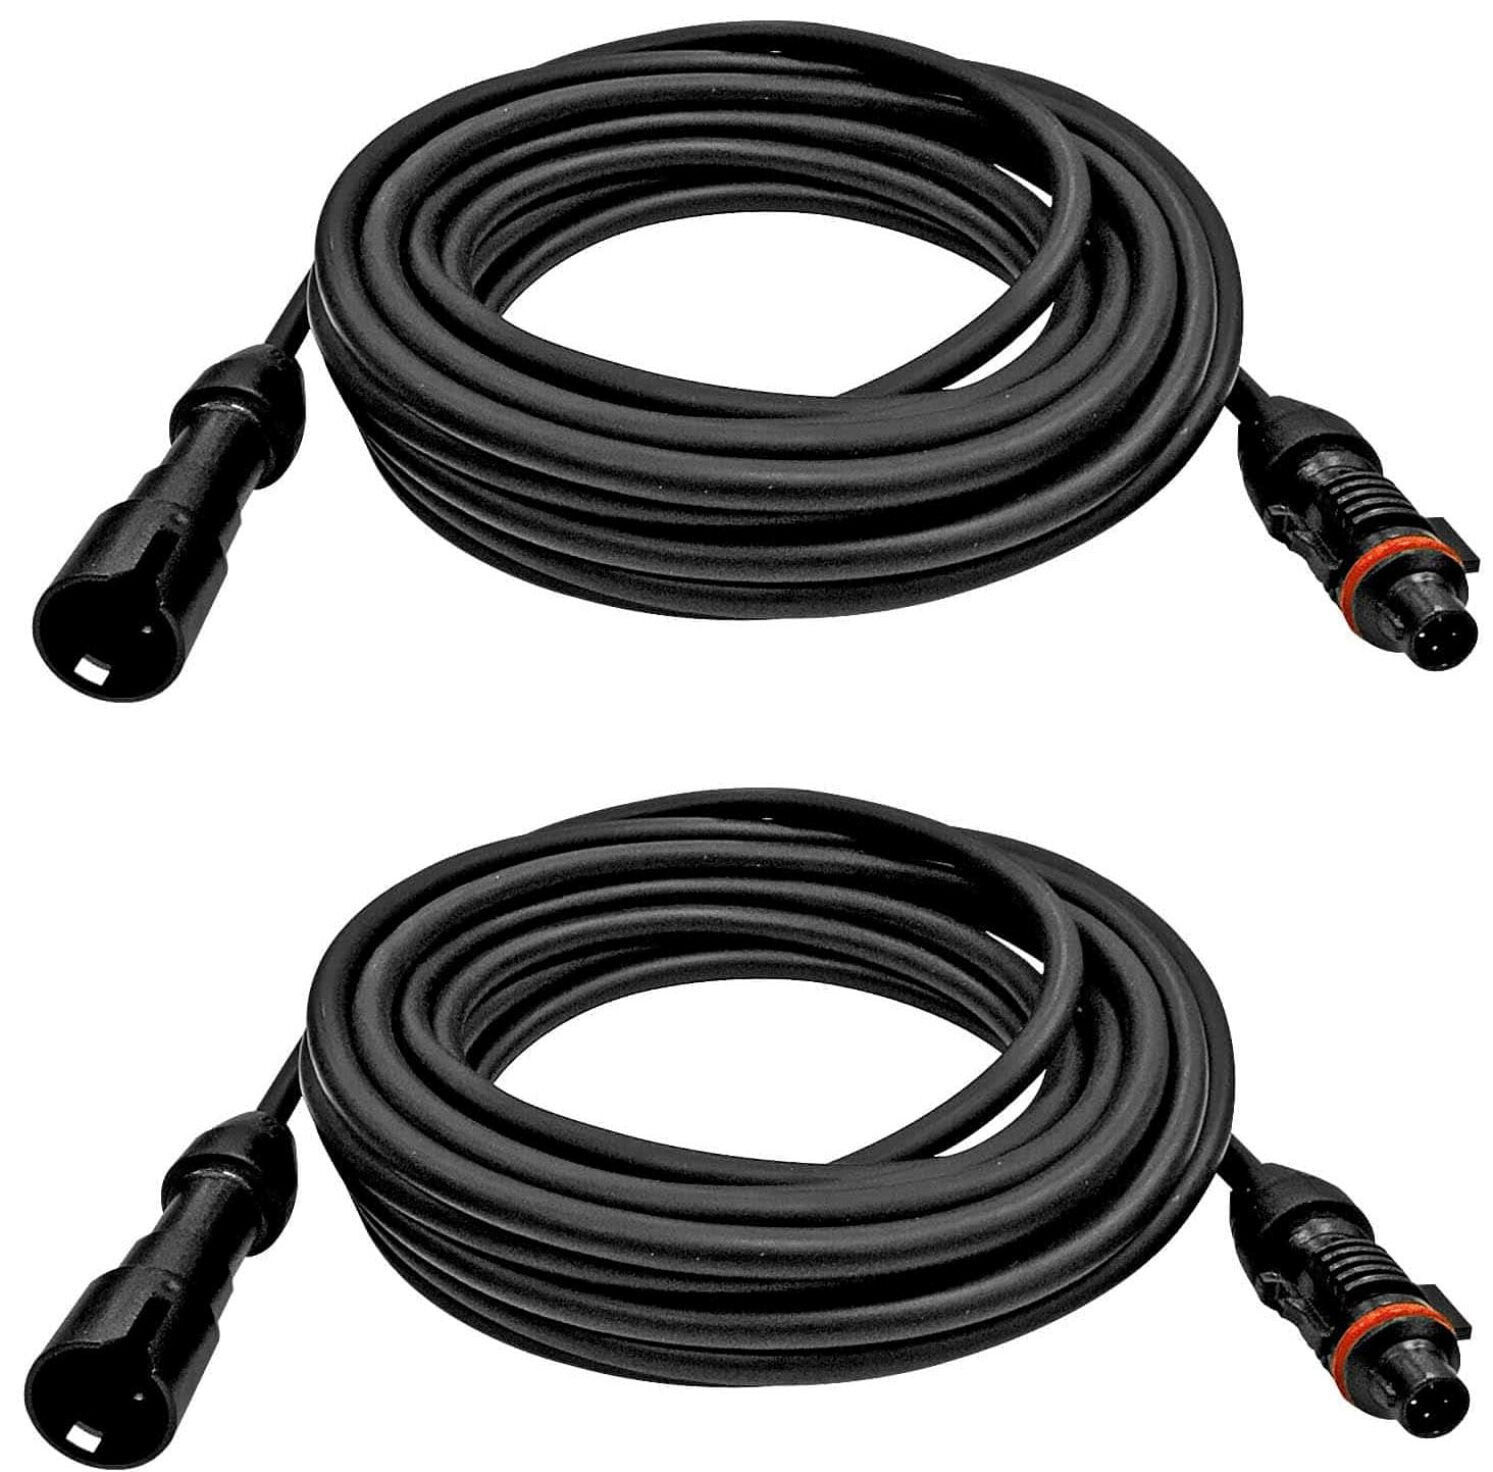 Voyager CEC15 Rear View LCD Monitor 15ft. Extension Cable (Pack of 2)